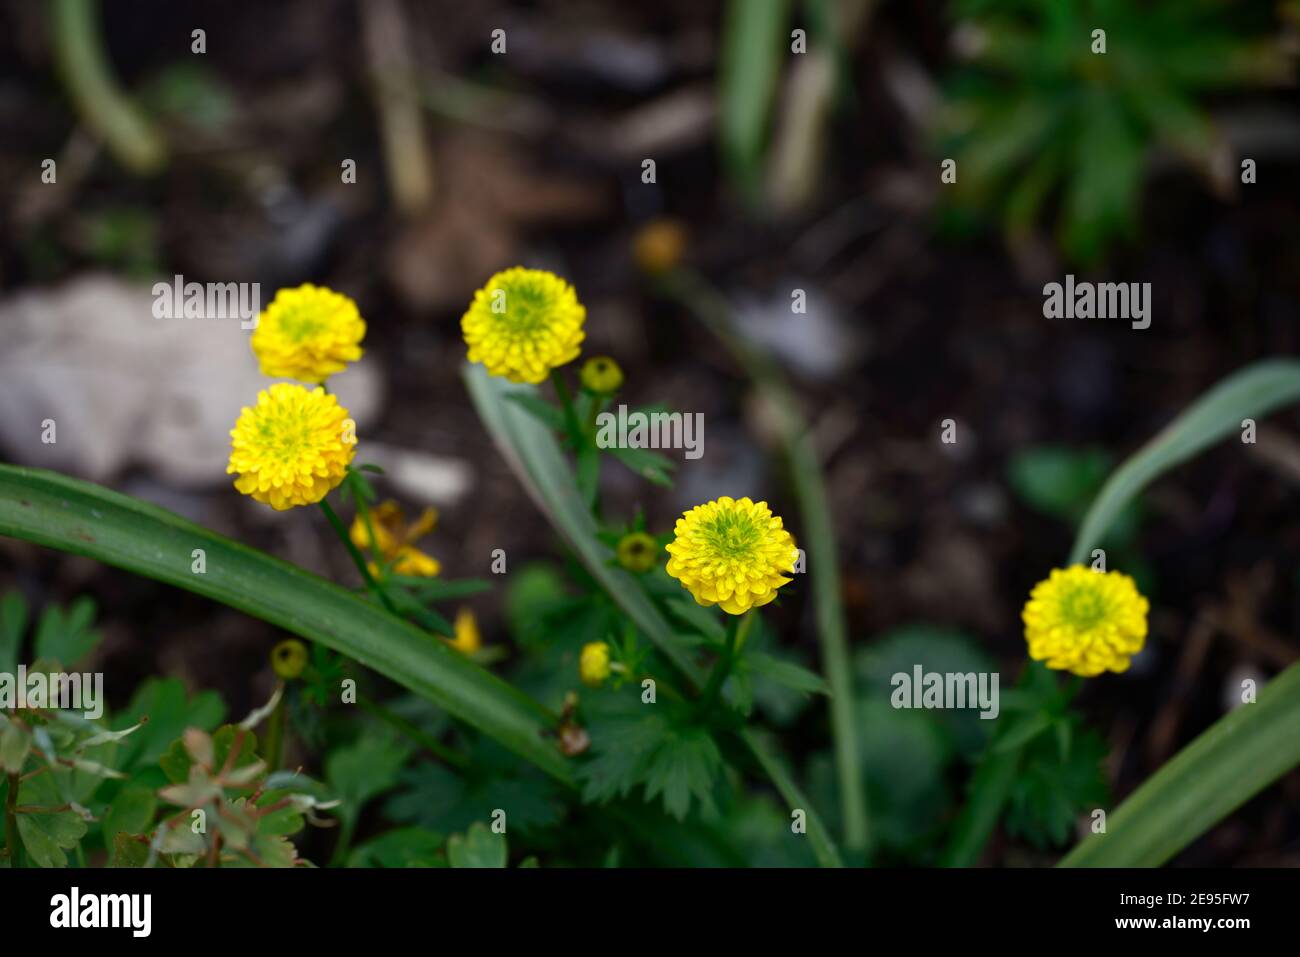 Ranunculus montanus,Fully double yellow flowers with a green center,double yellow flowers,flowering,spring in the garden,RM Floral Stock Photo